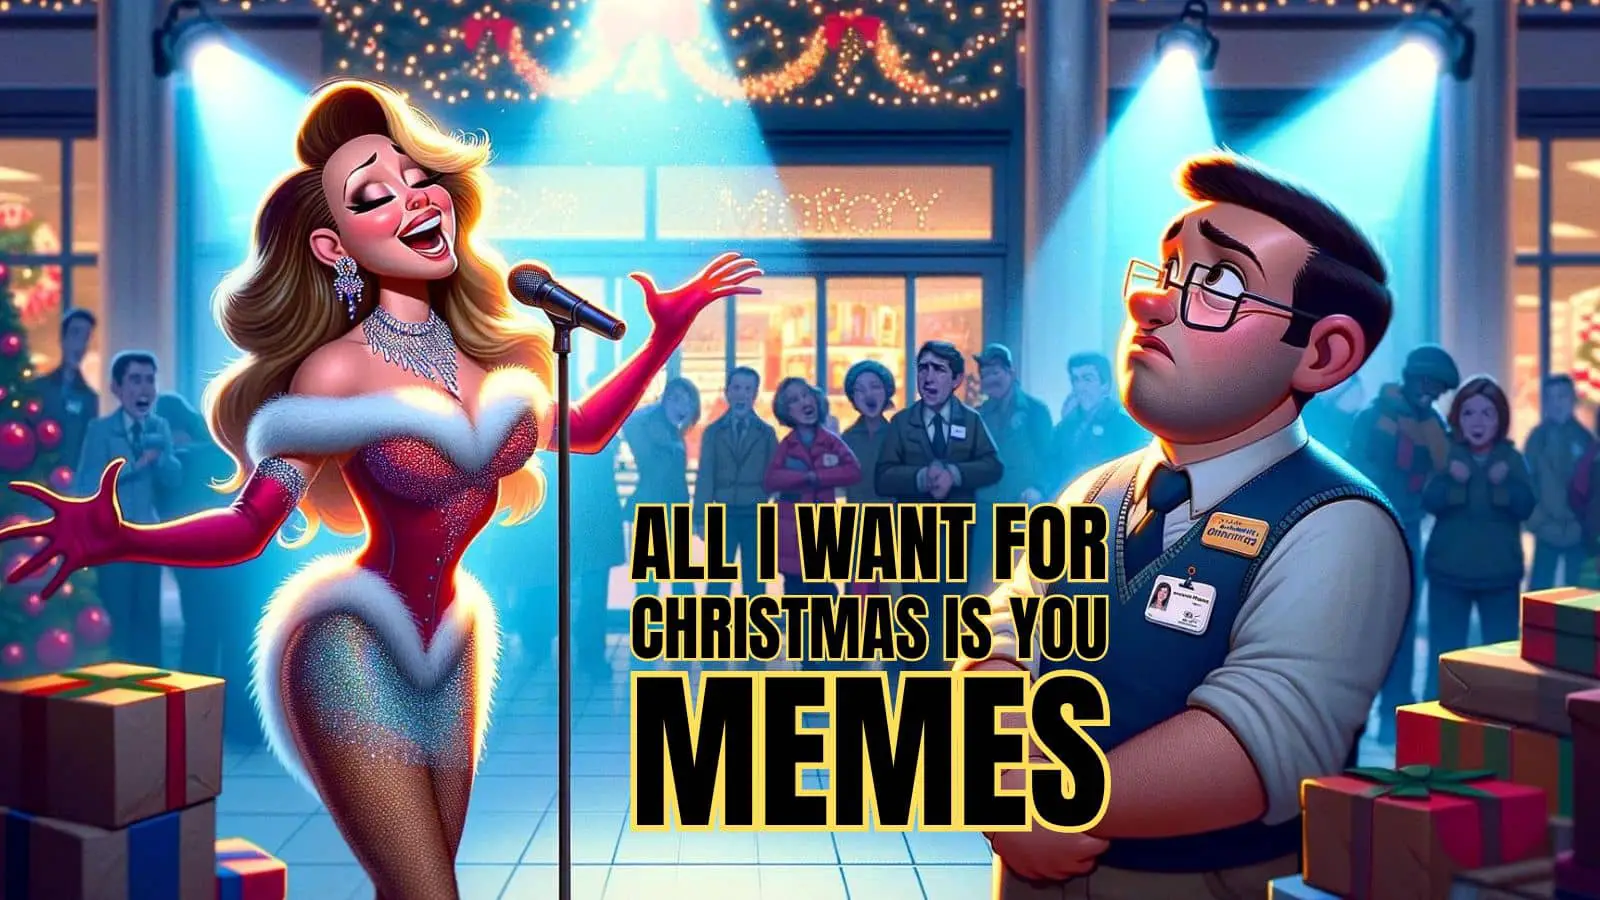 Funny All I Want For Christmas Is You Memes on Mariah Carey